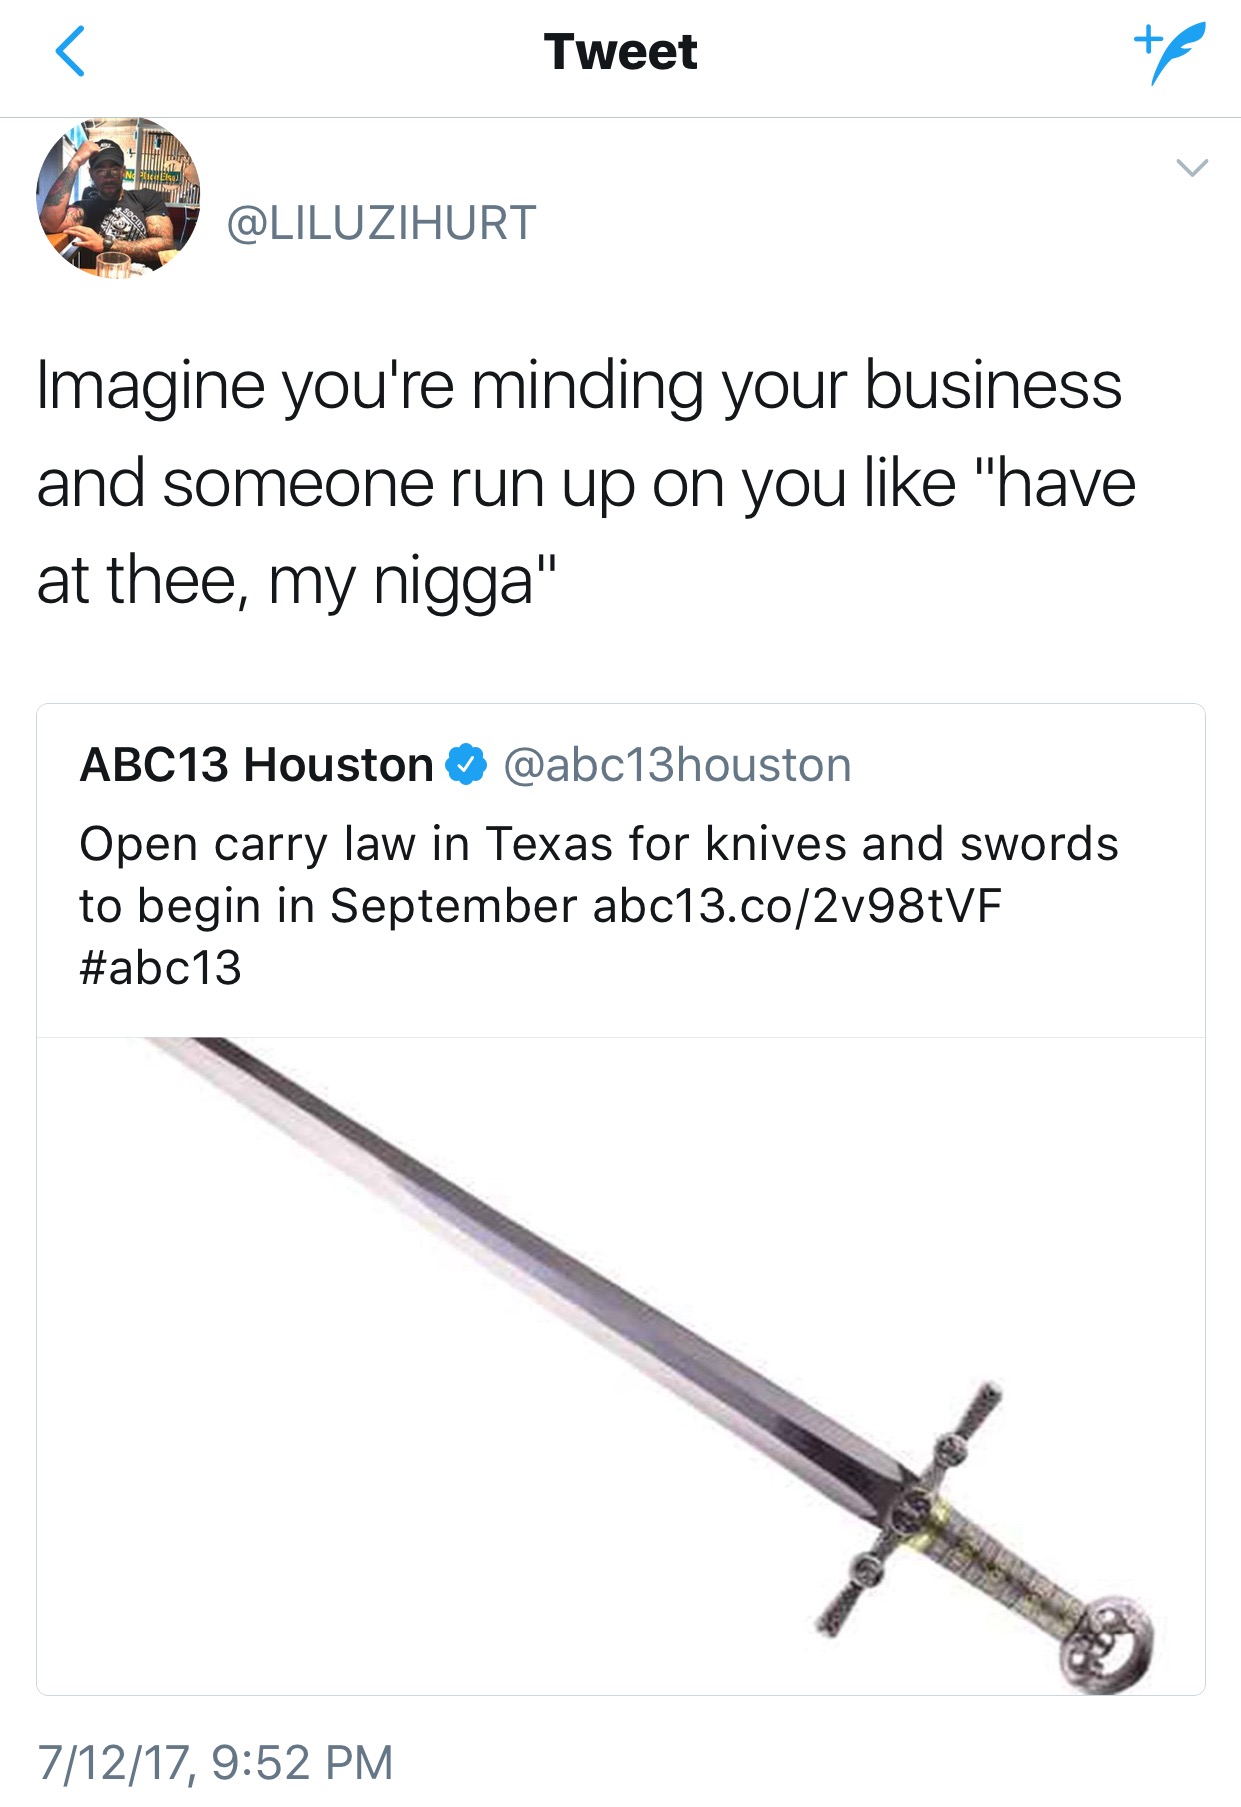 sword jokes - Tweet Imagine you're minding your business and someone run up on you "have at thee, my nigga" ABC13 Houston Open carry law in Texas for knives and swords to begin in September abc13.co2v98tVF 71217,